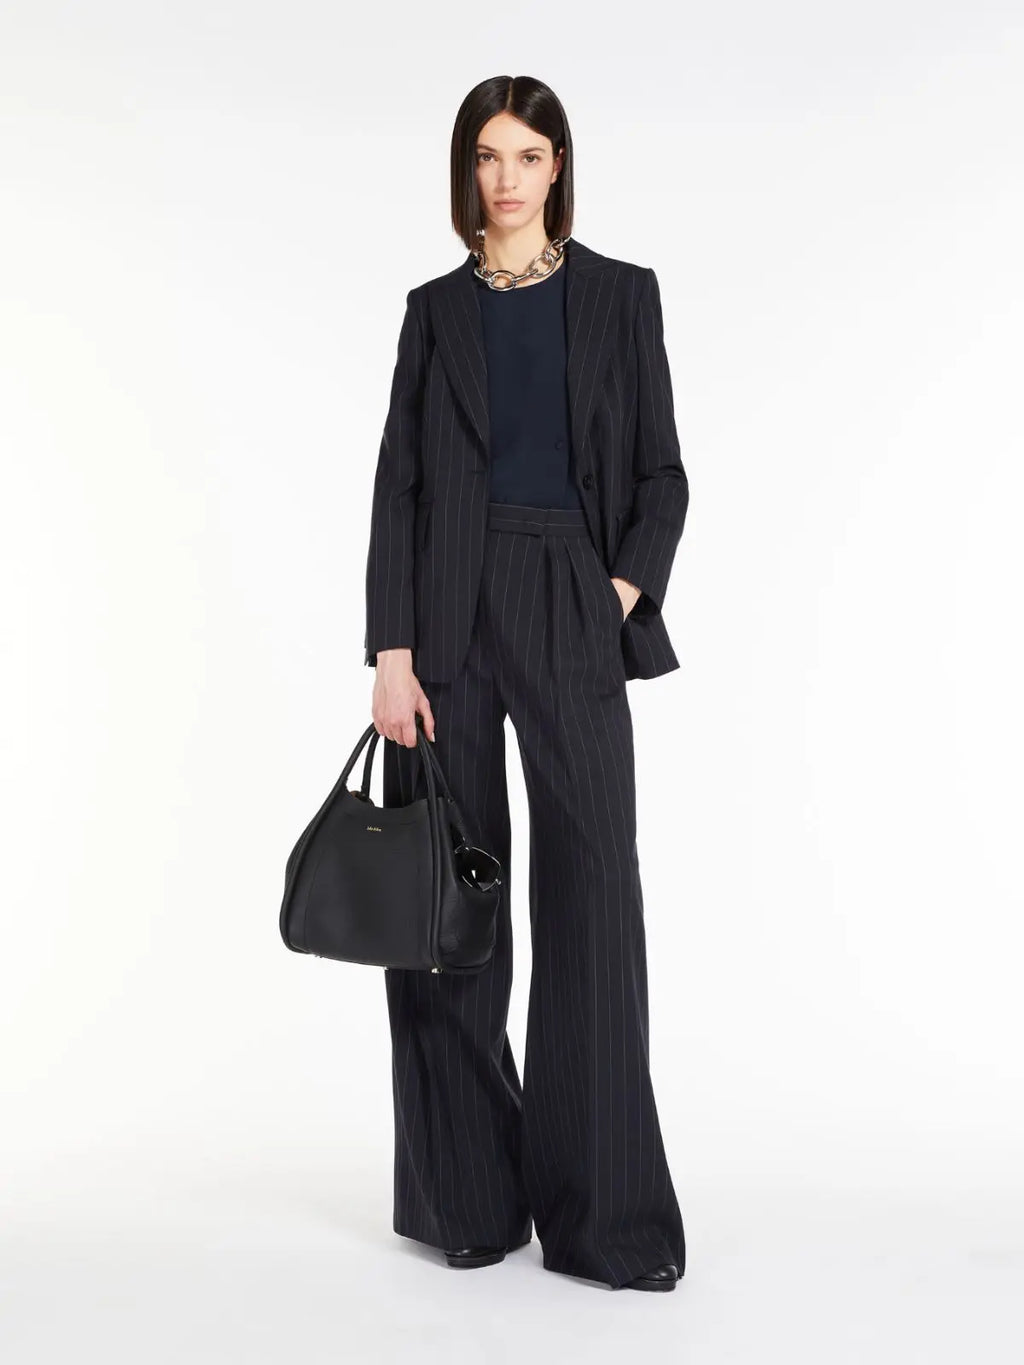 Introducing the Ensemble Mara, the ultimate in individualized French style. Our casual suit coat and wide leg pants are the perfect commuter set, providing both style and comfort. Made with high-quality materials and designed for the modern woman. Upgrade your wardrobe with this must-have set.